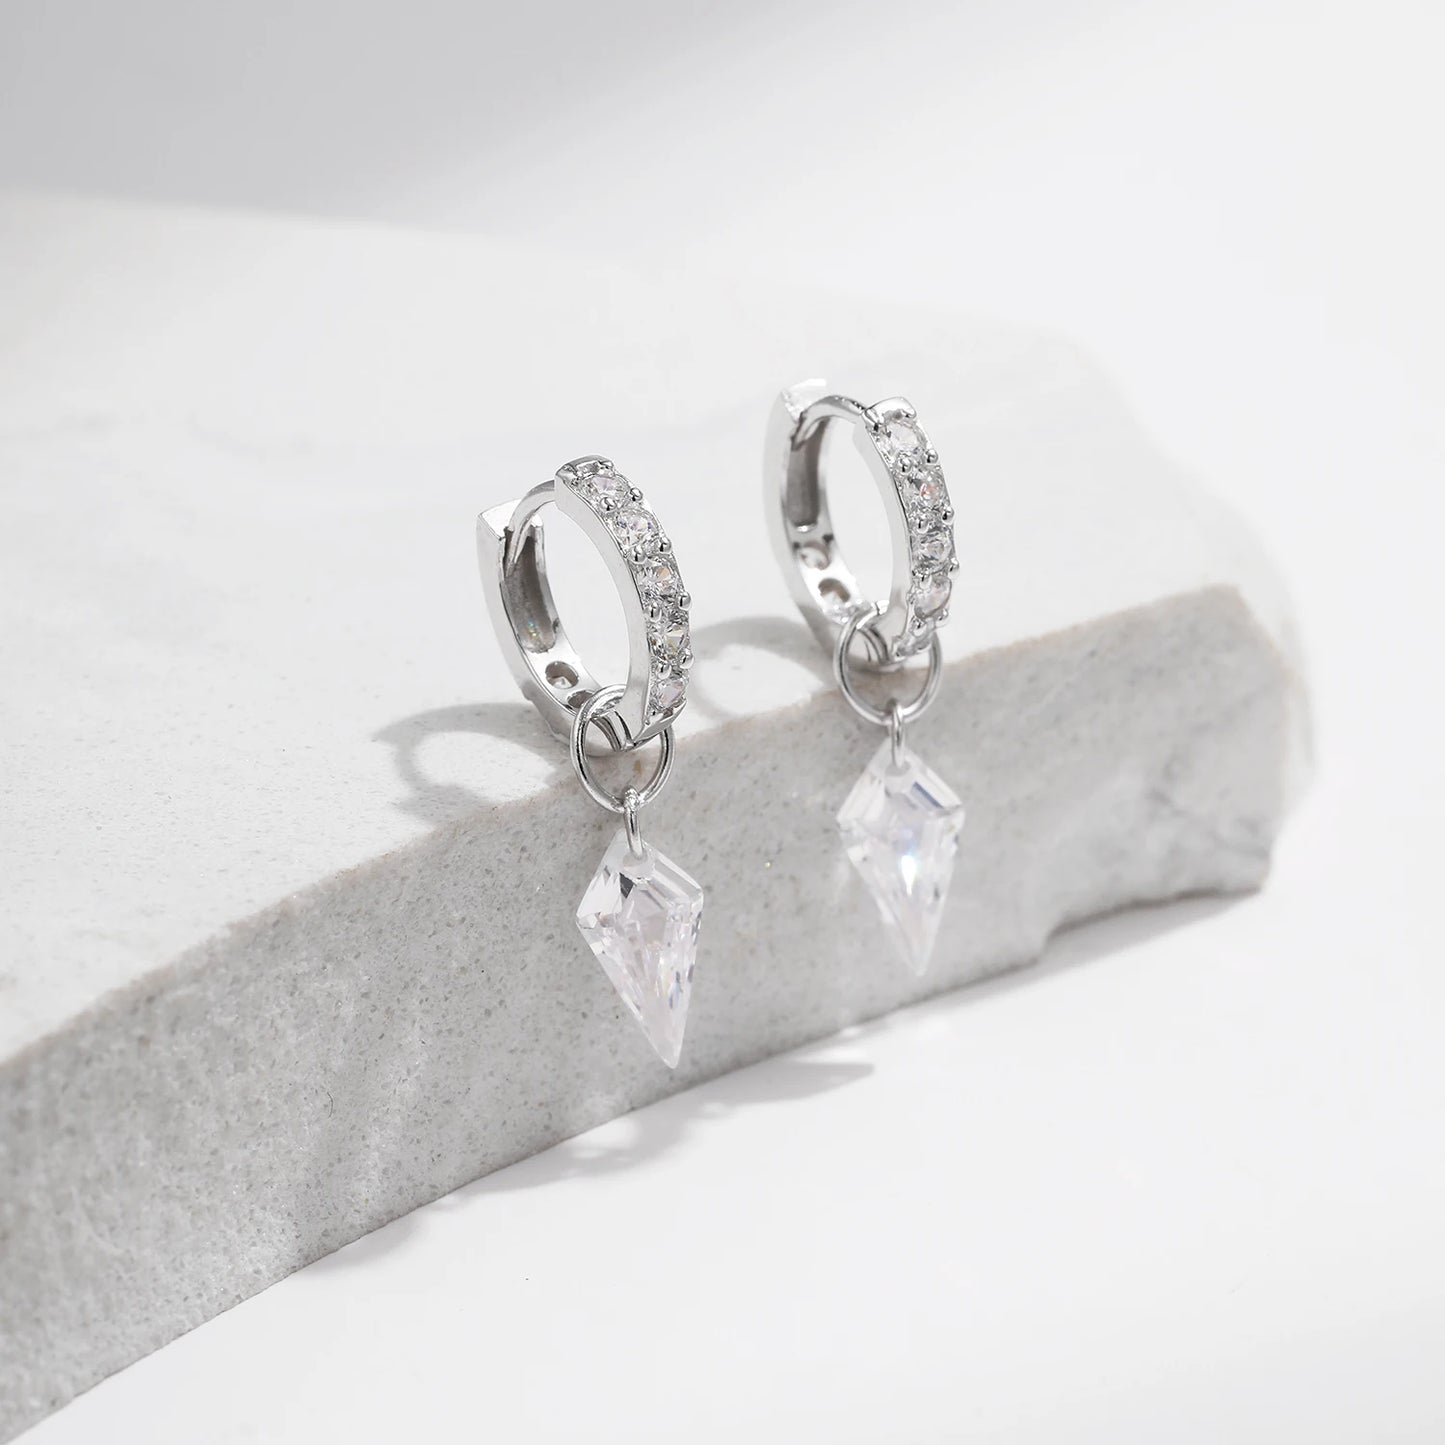 Unleash Your Inner Sparkle with MQ 925 Silver Earrings - Platinum Plated for Women